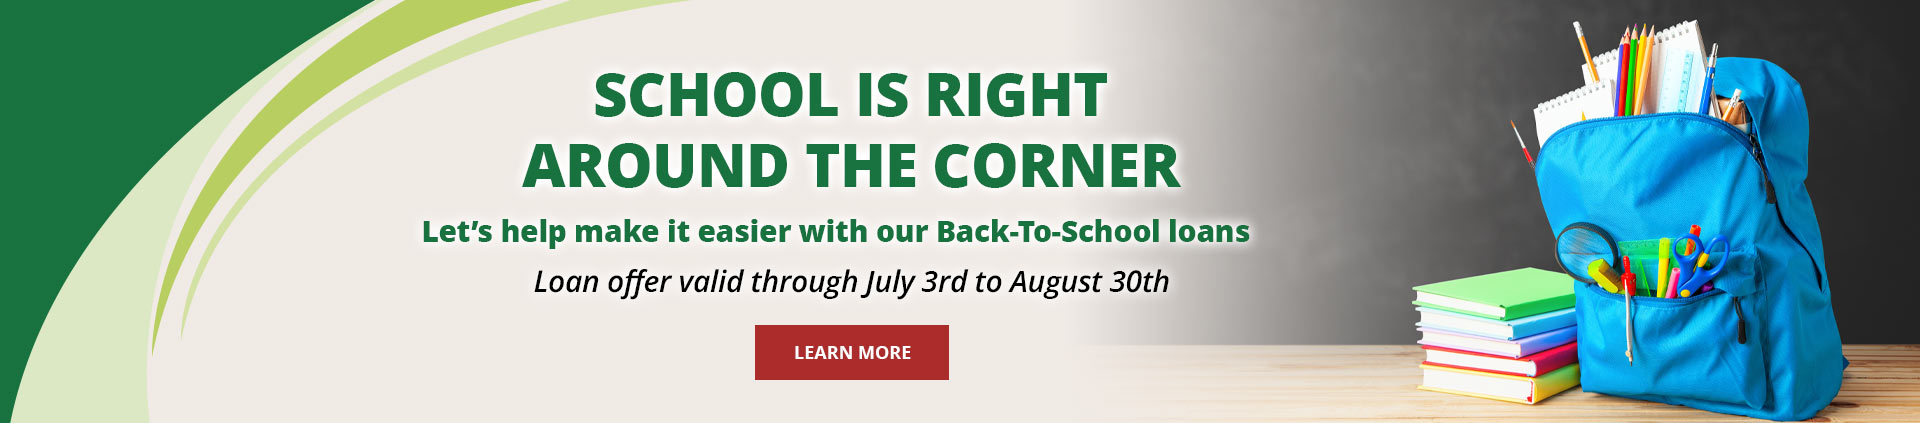 School is right around the corner.Let's help make it easier with our Back-To-School loans.Loan offer valid through July 3rd to August 31st.Learn More